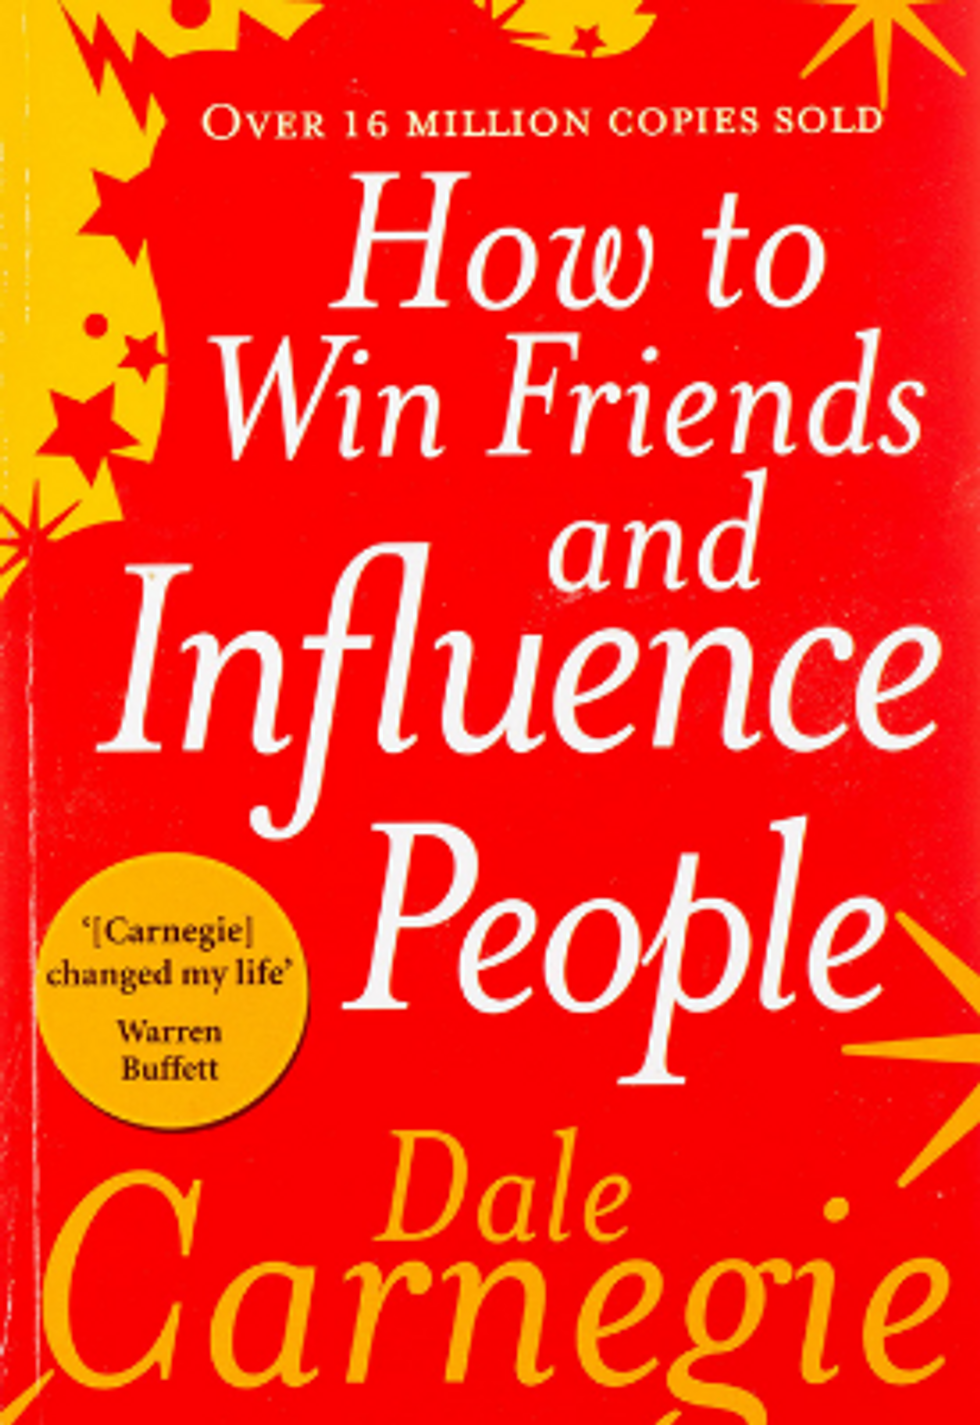 The front cover of the book "How to Win Friends and Influence People" by Dale Carnegie